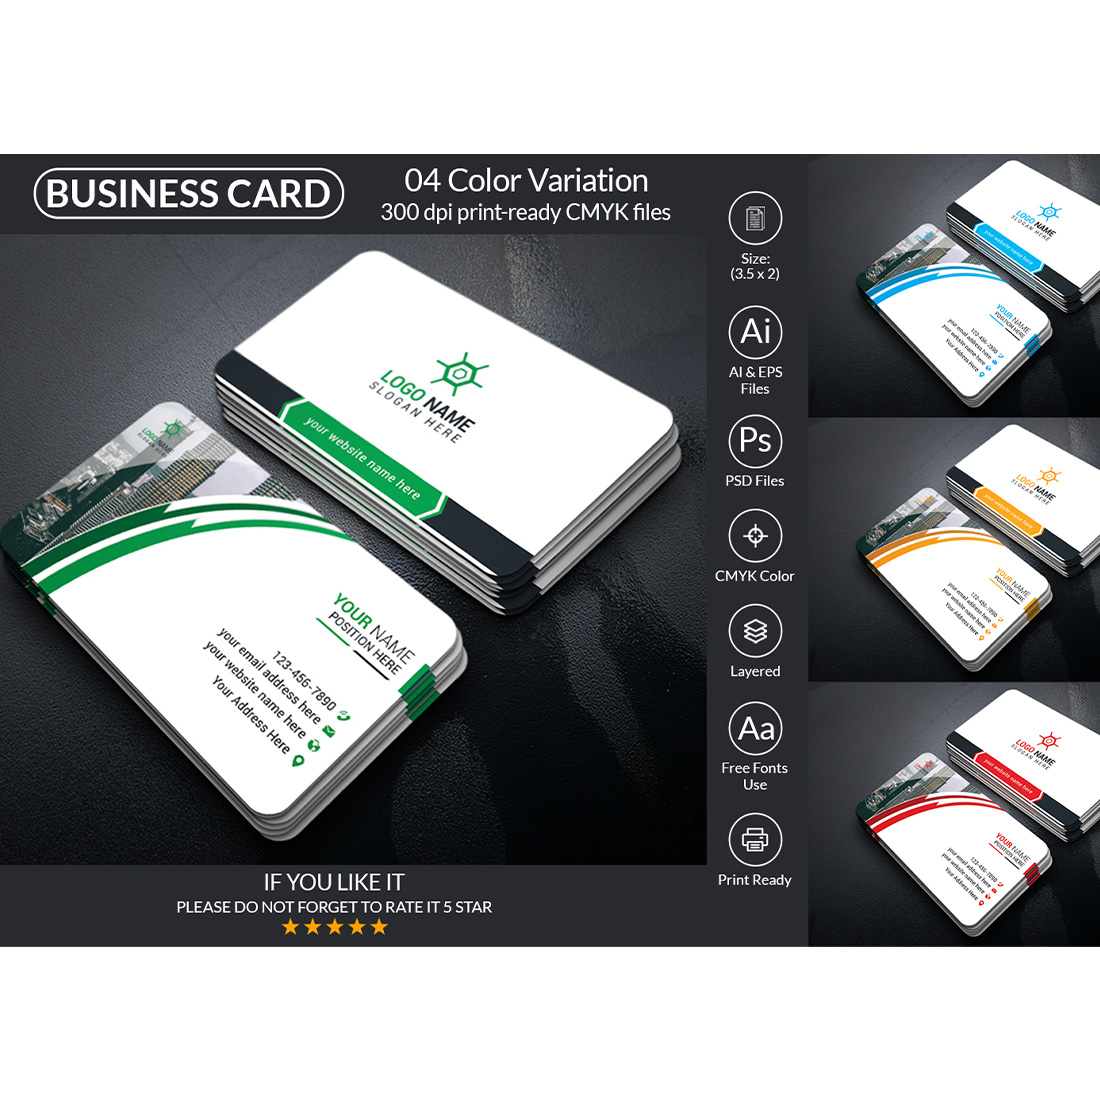 Modern Business Card Design Template cover image.